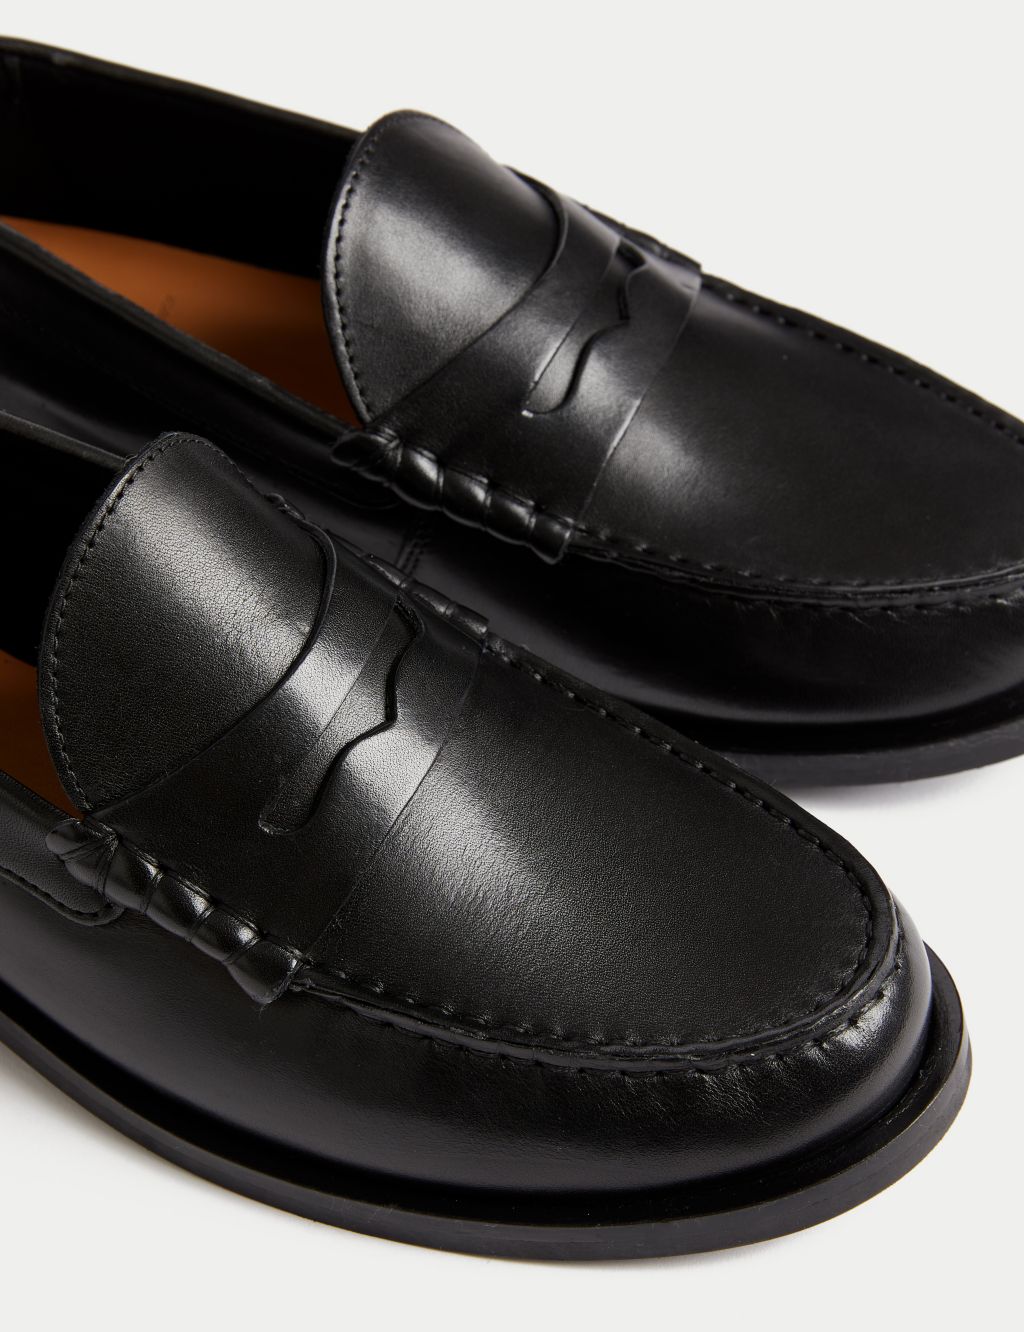 Leather Loafers image 3